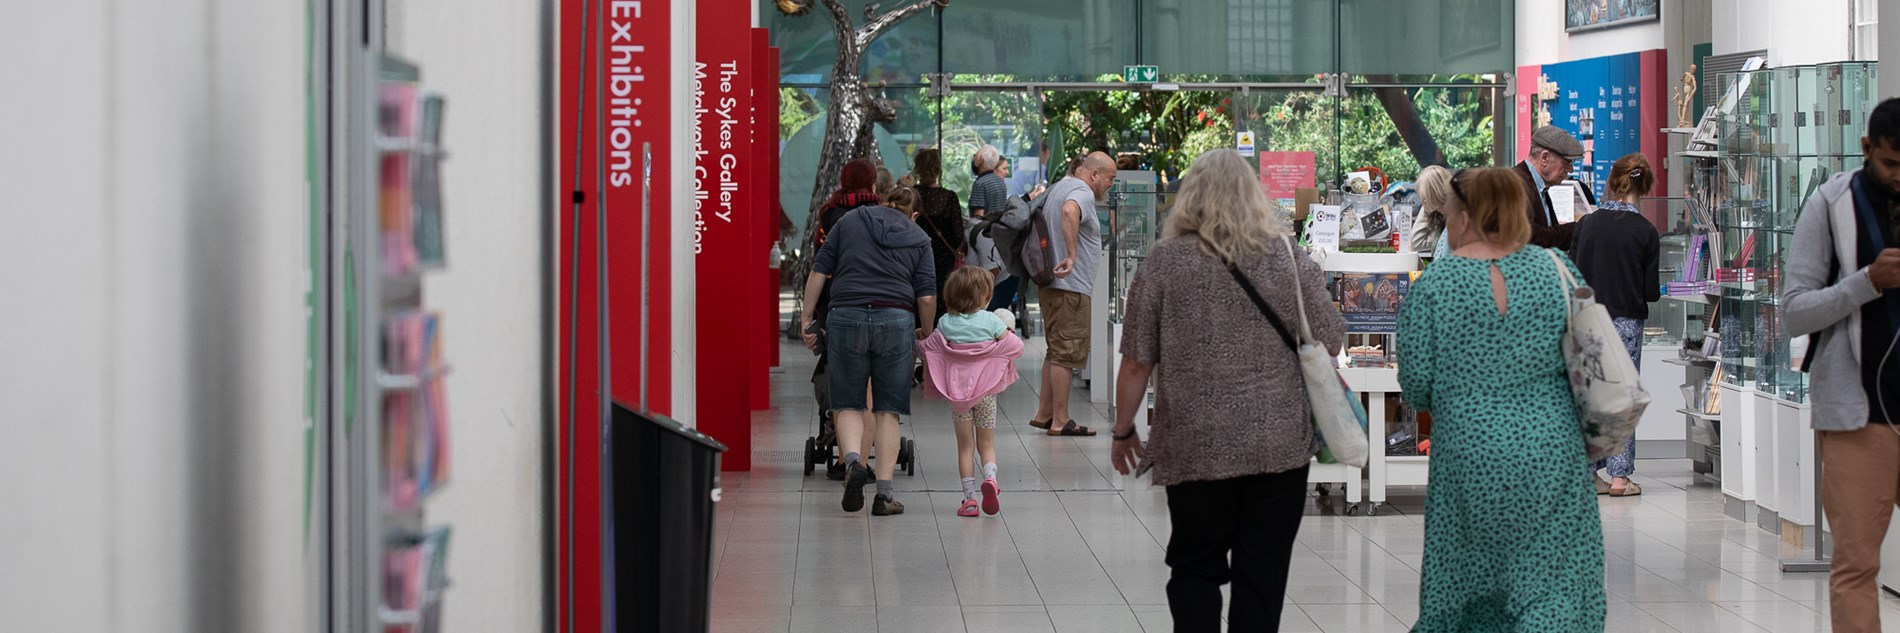 Adults and a child walking through the Millennium Gallery shop and entrance / exit to the Winter Gardens.  